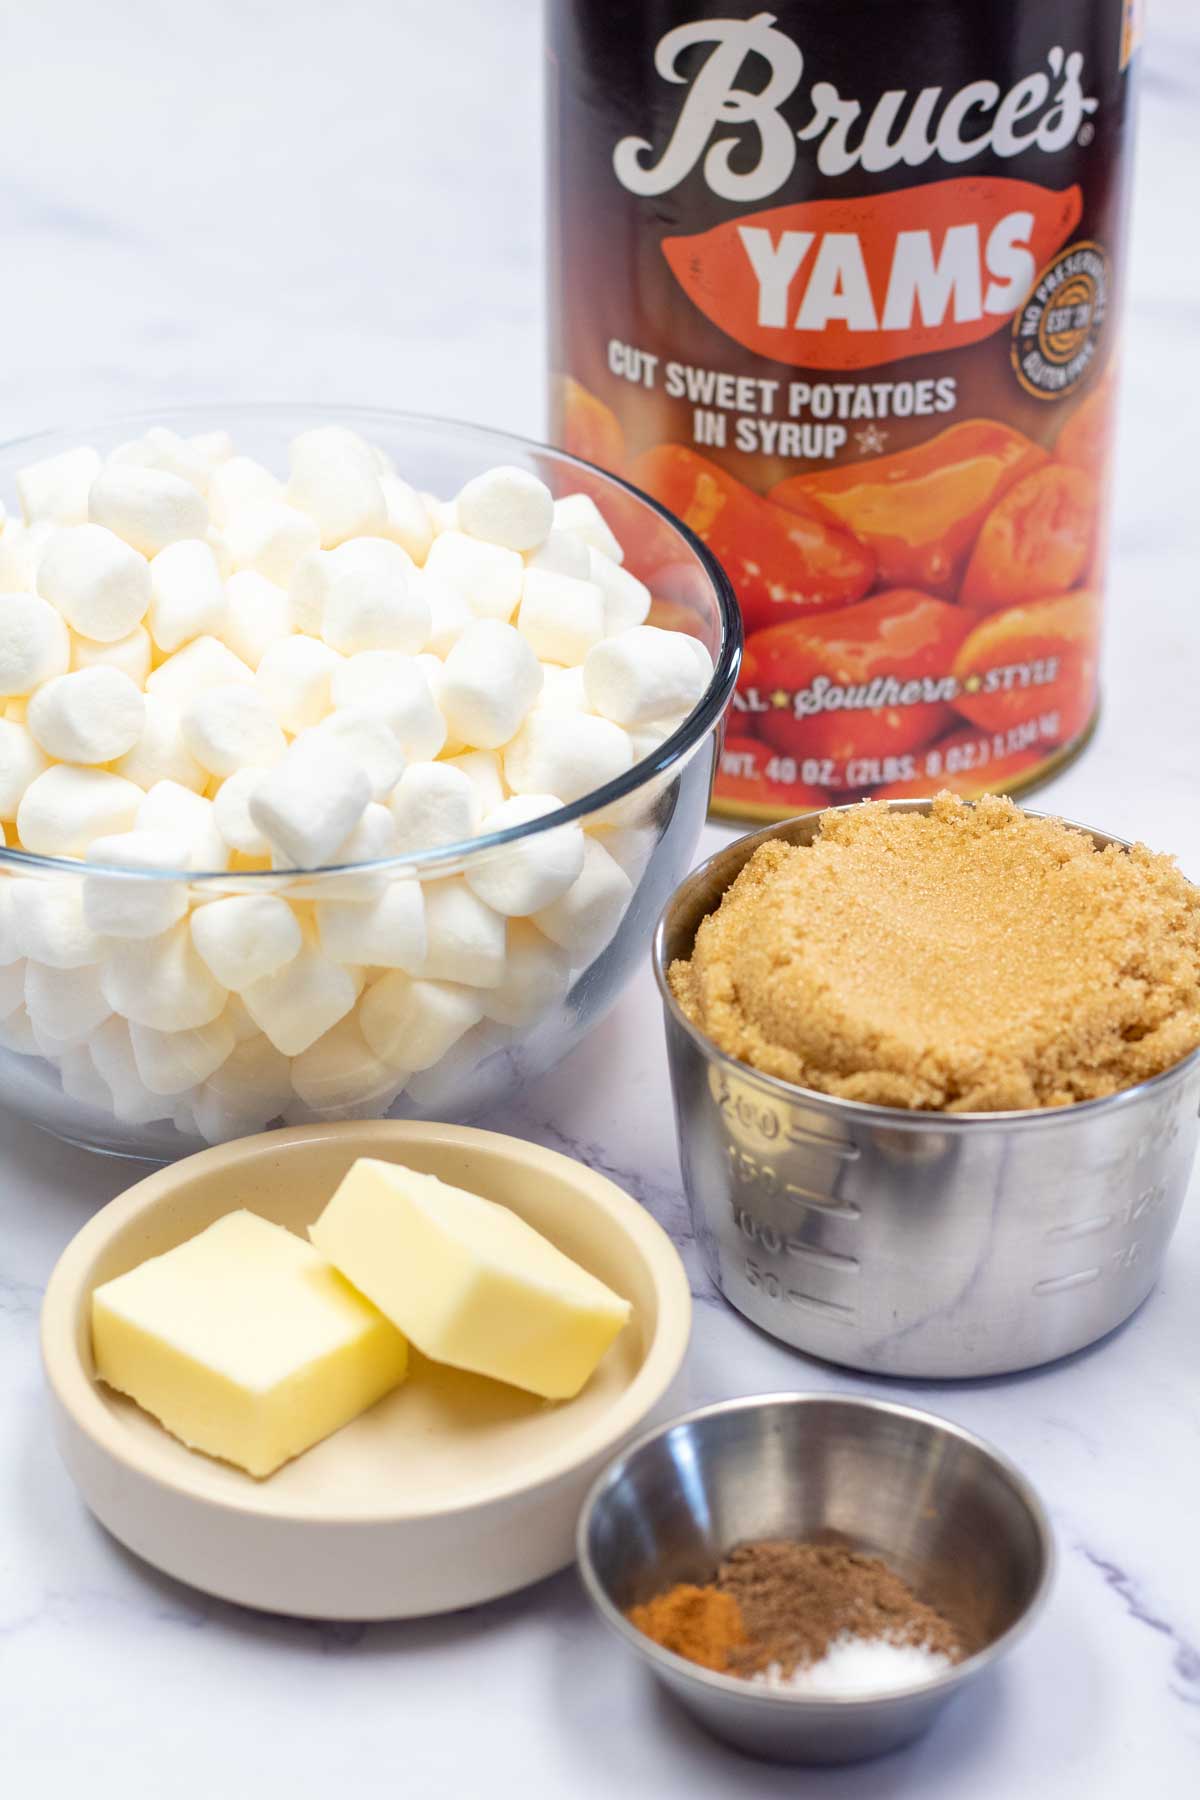 Tall image showing ingredients needed for candied yams with brown sugar.